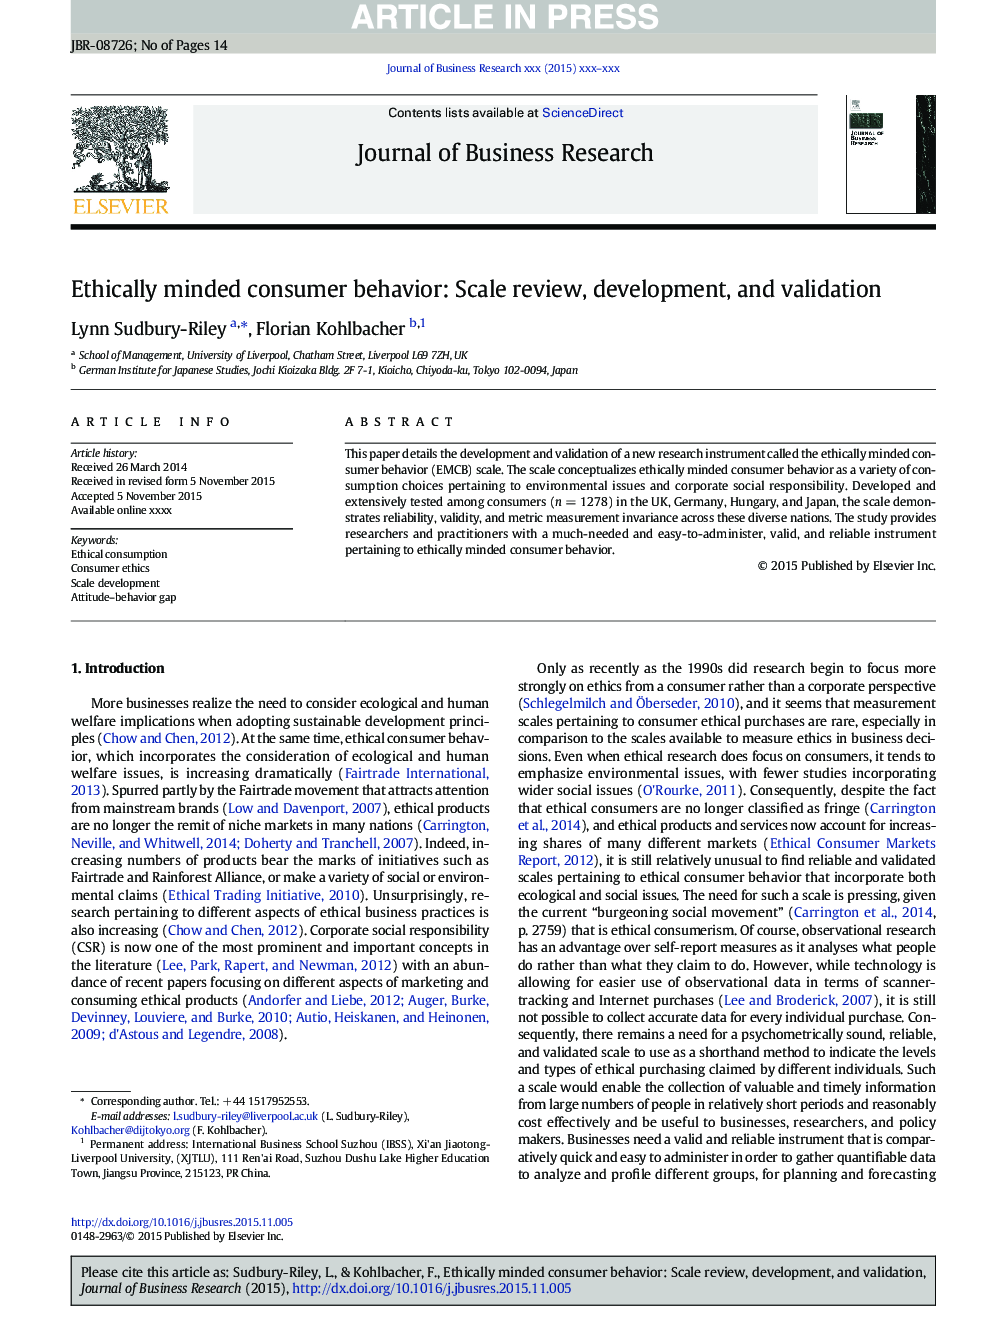 Ethically minded consumer behavior: Scale review, development, and validation